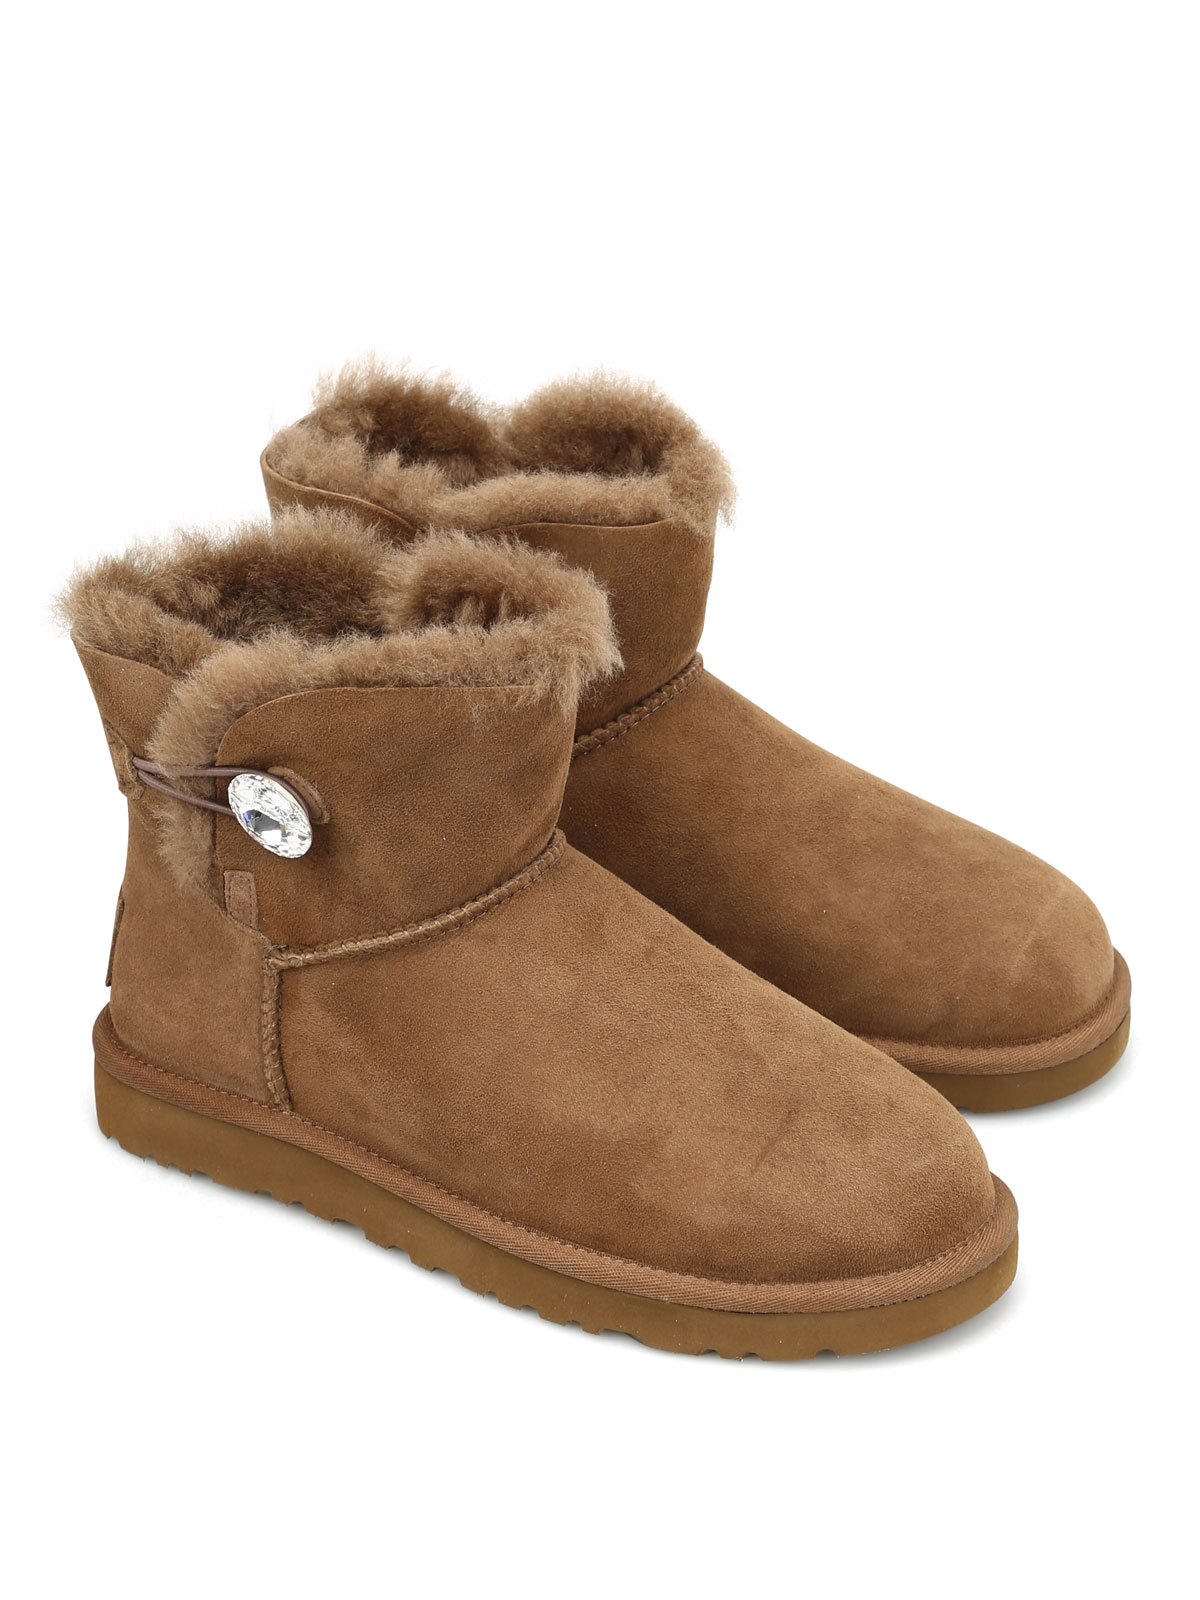 Ugg - Mini Bailey Button Bling ankle 